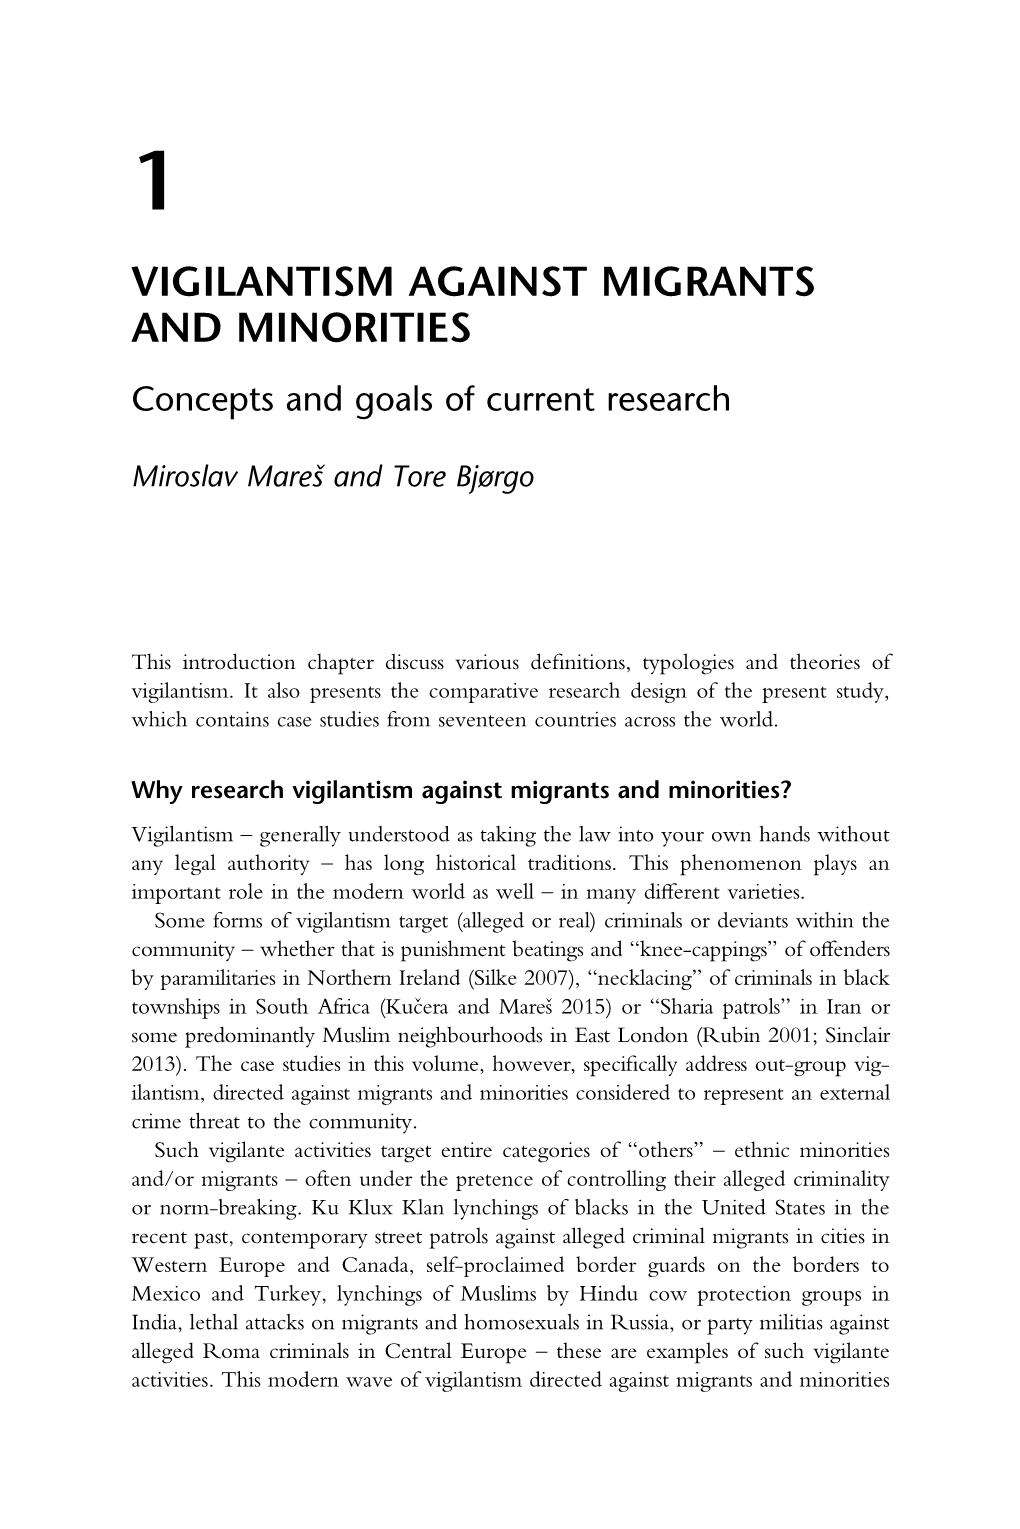 VIGILANTISM AGAINST MIGRANTS and MINORITIES Concepts and Goals of Current Research